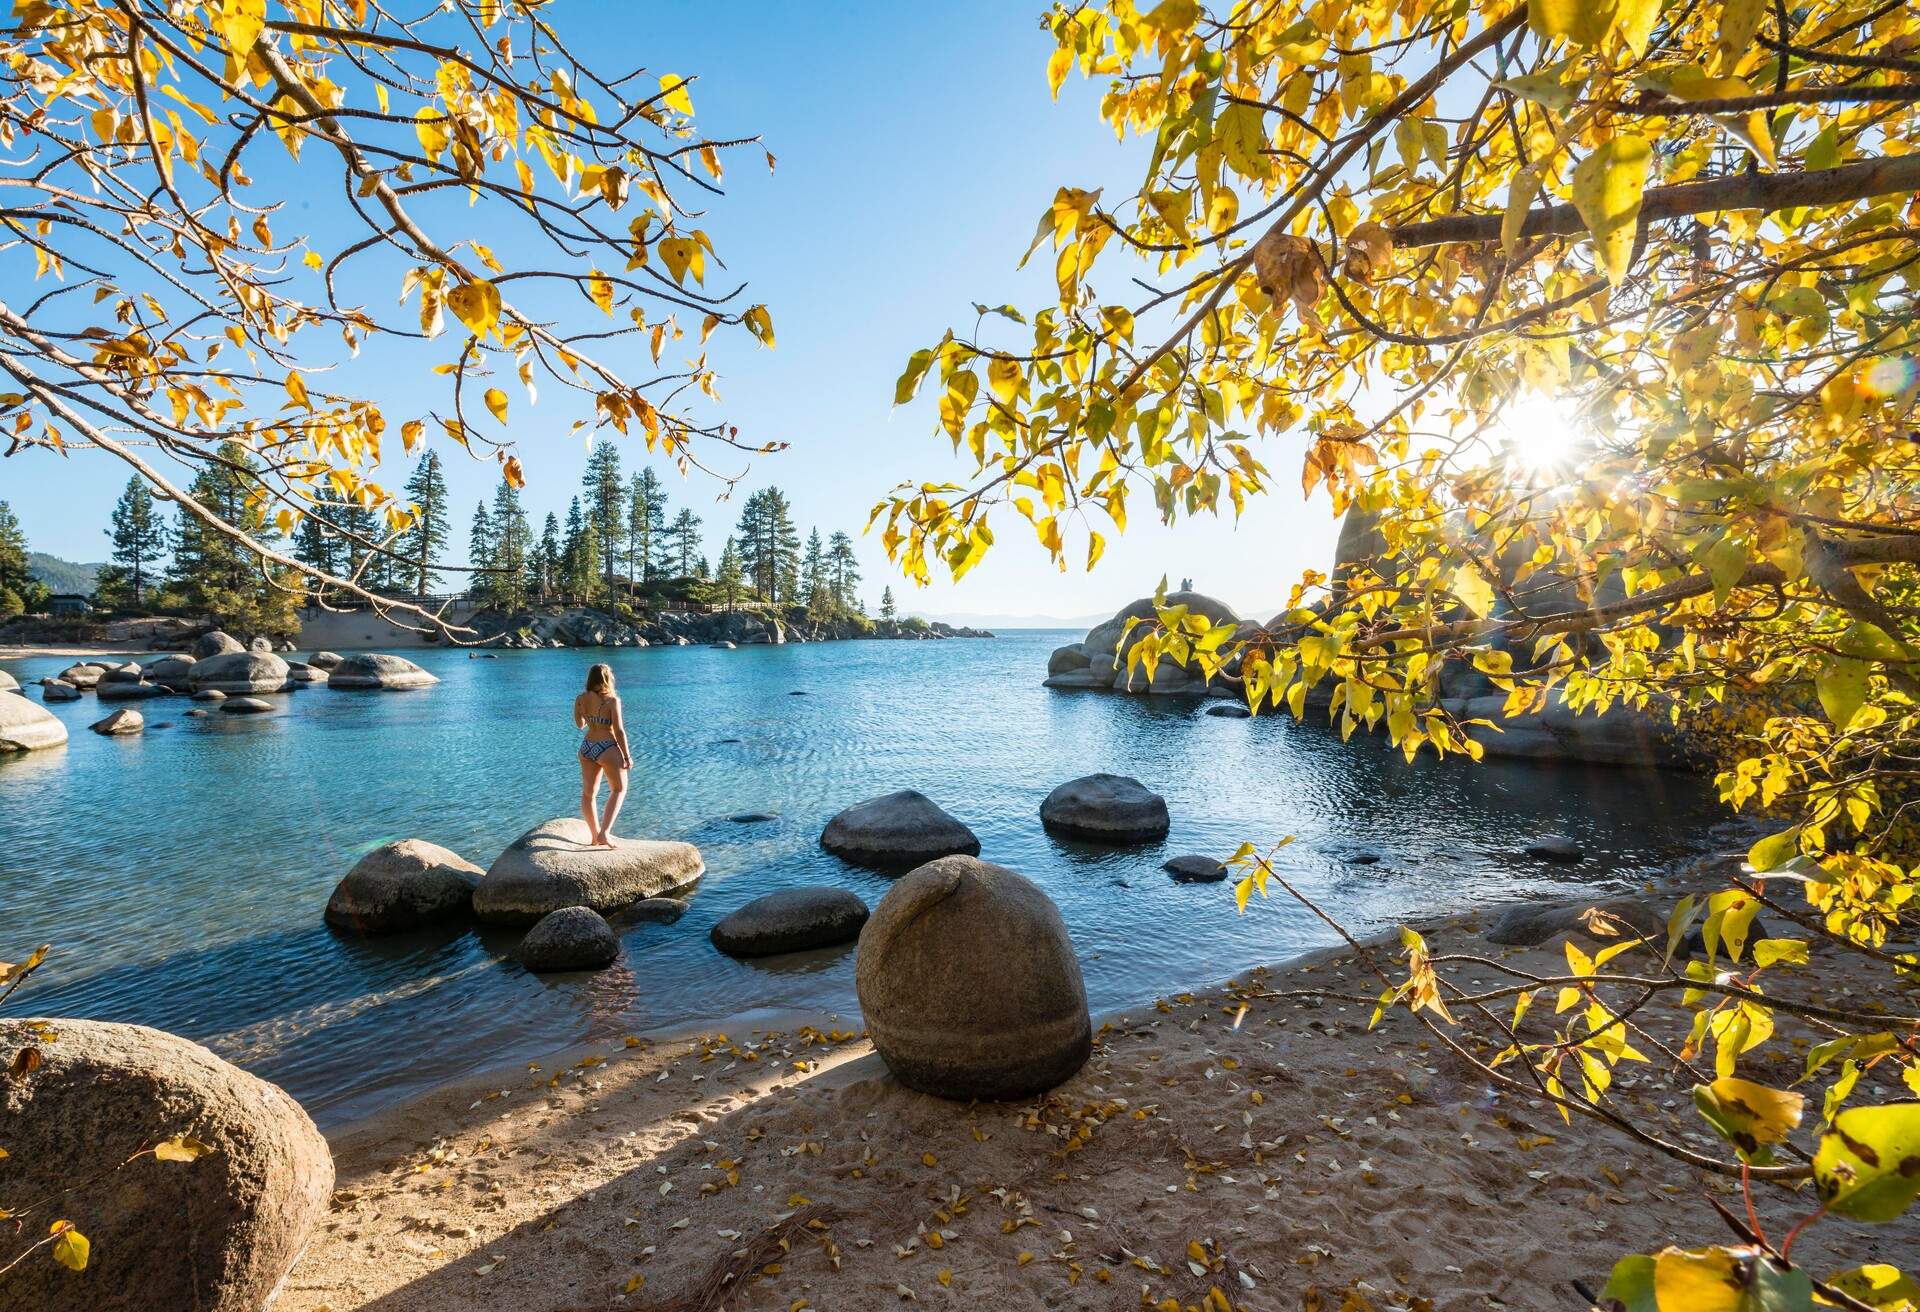 DEST_USA_CALIFORNIA_LAKE-TAHOE_AUTUMN_GettyImages-1135639386